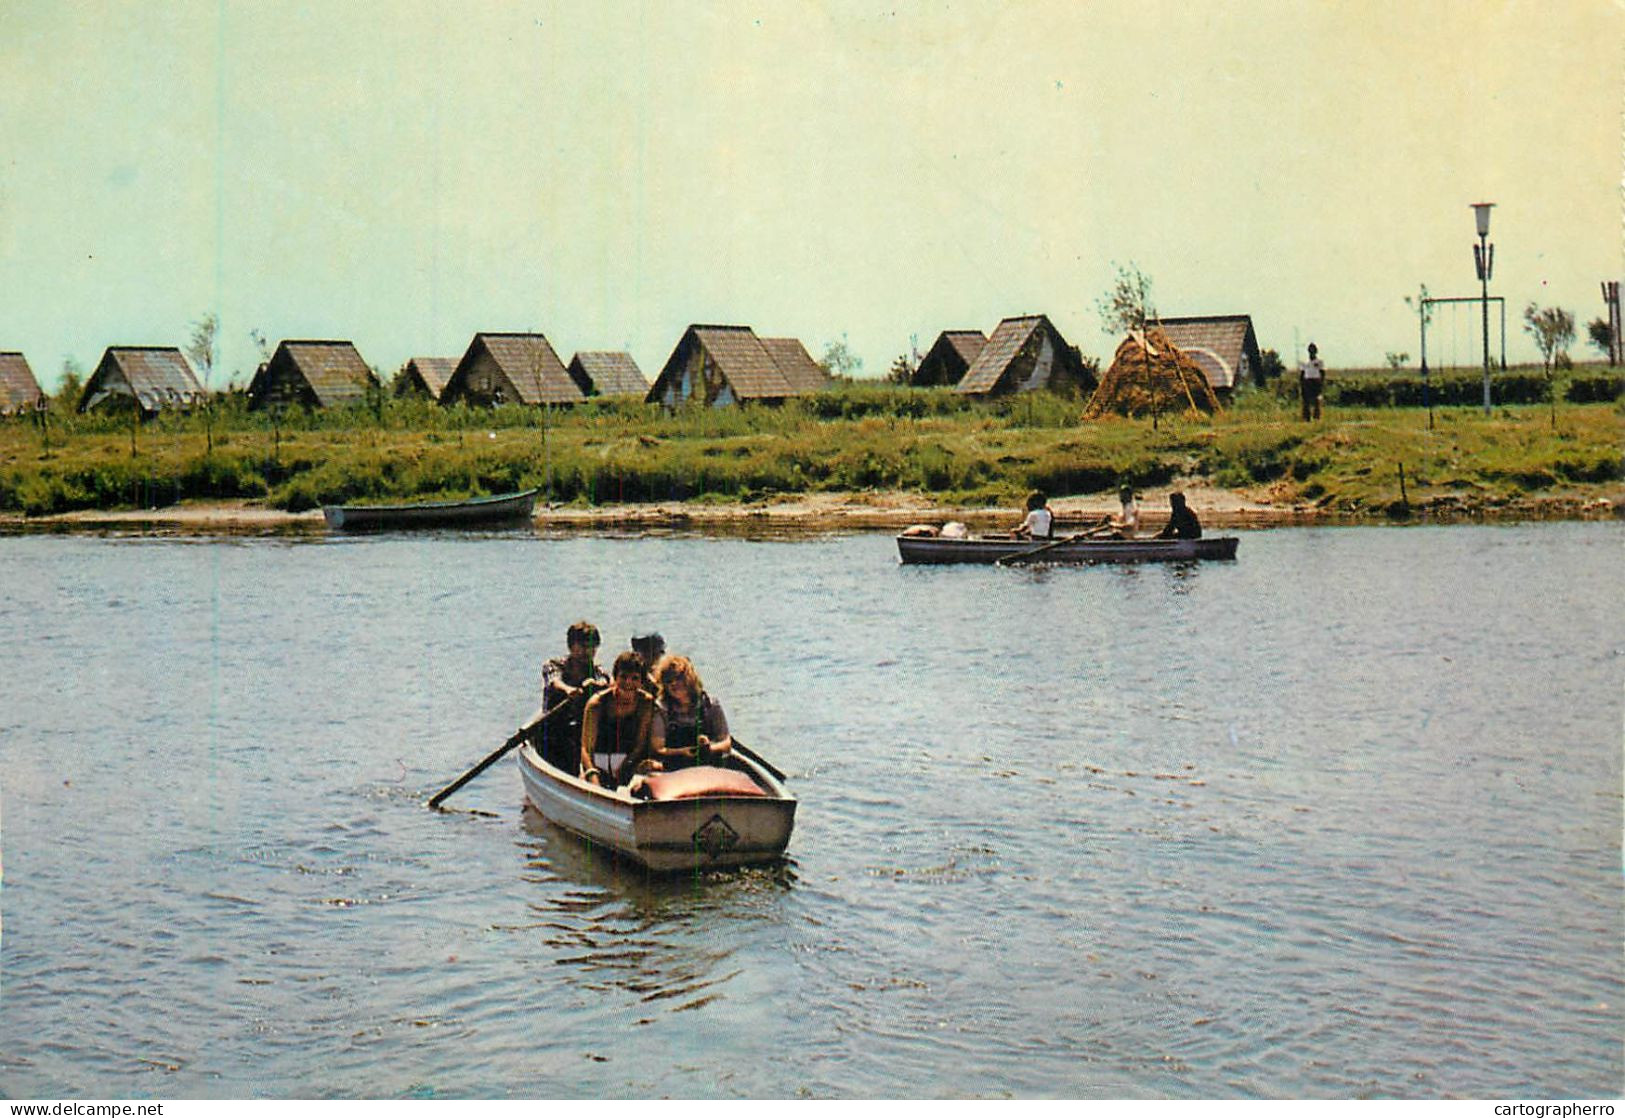 Navigation Sailing Vessels & Boats Themed Postcard Romania Danube Delta Rowboats - Voiliers